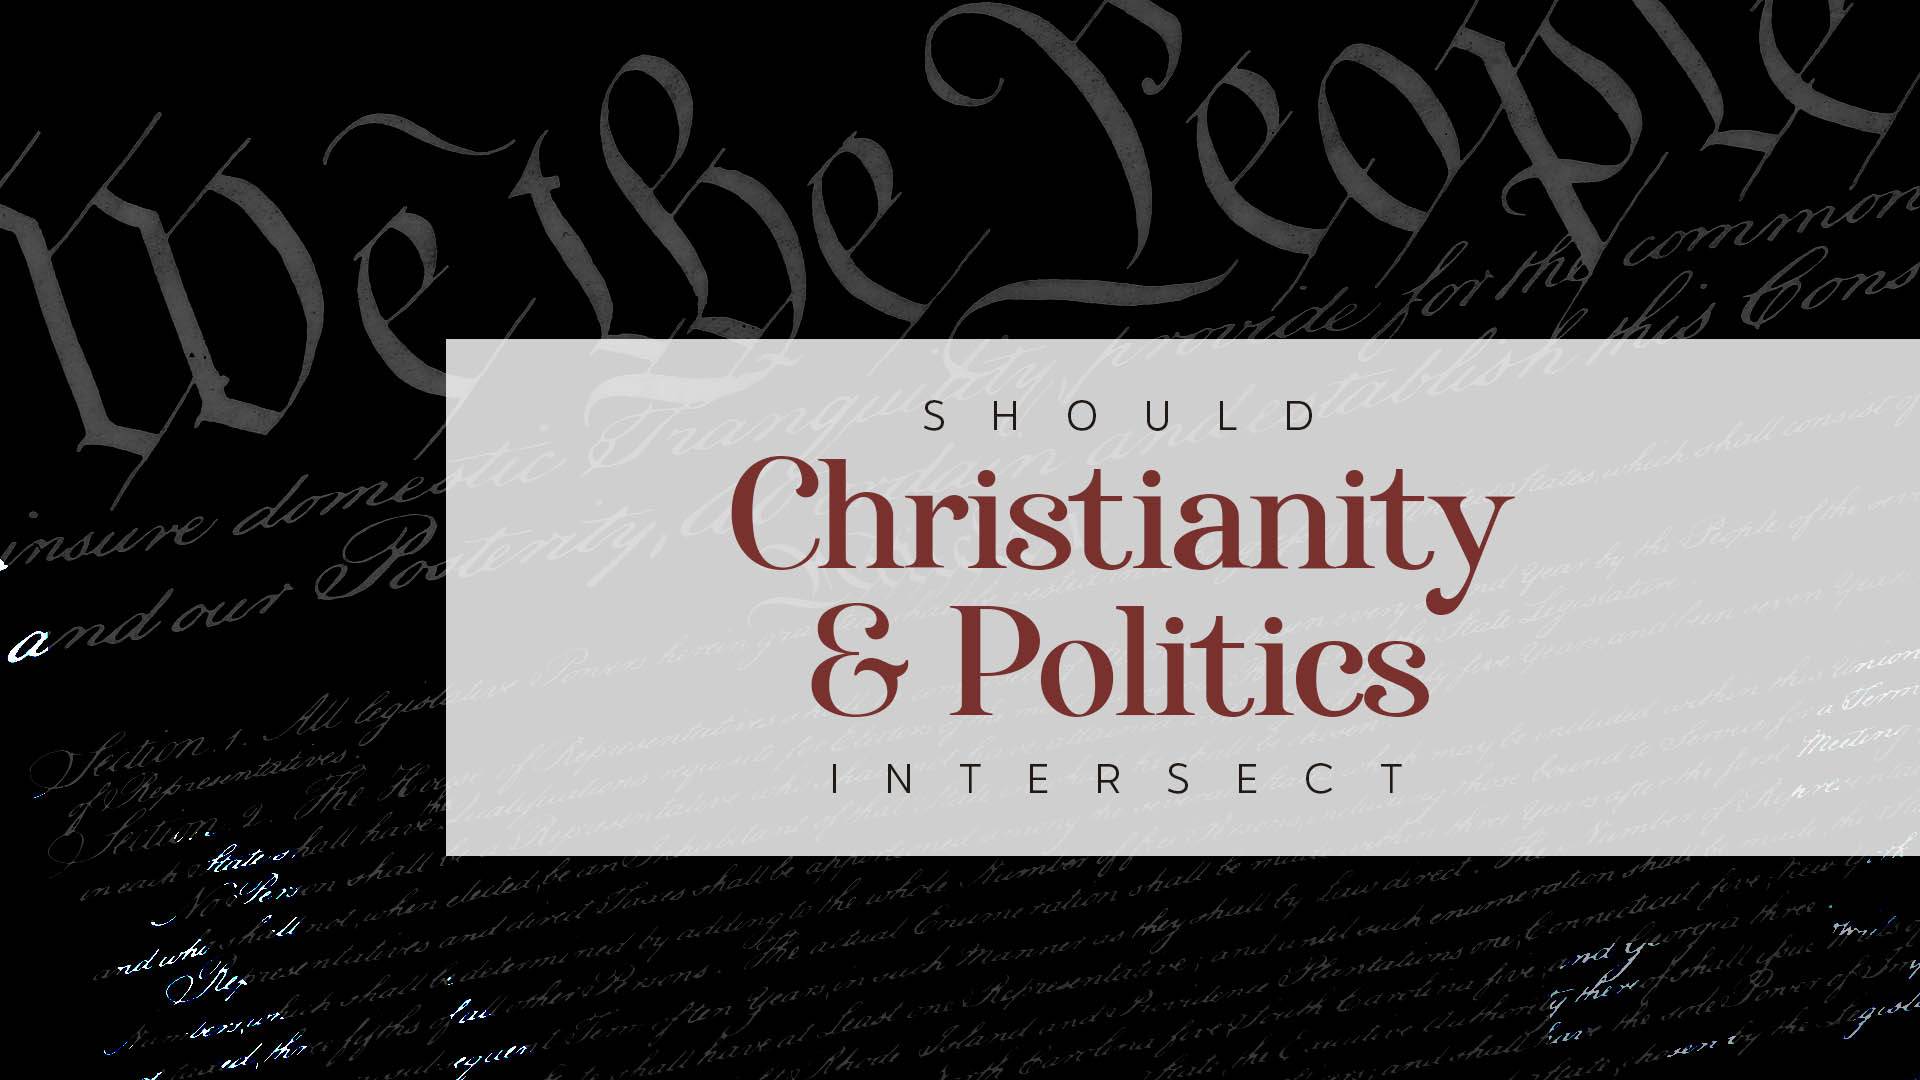 Should Christianity & Politics Intersect?